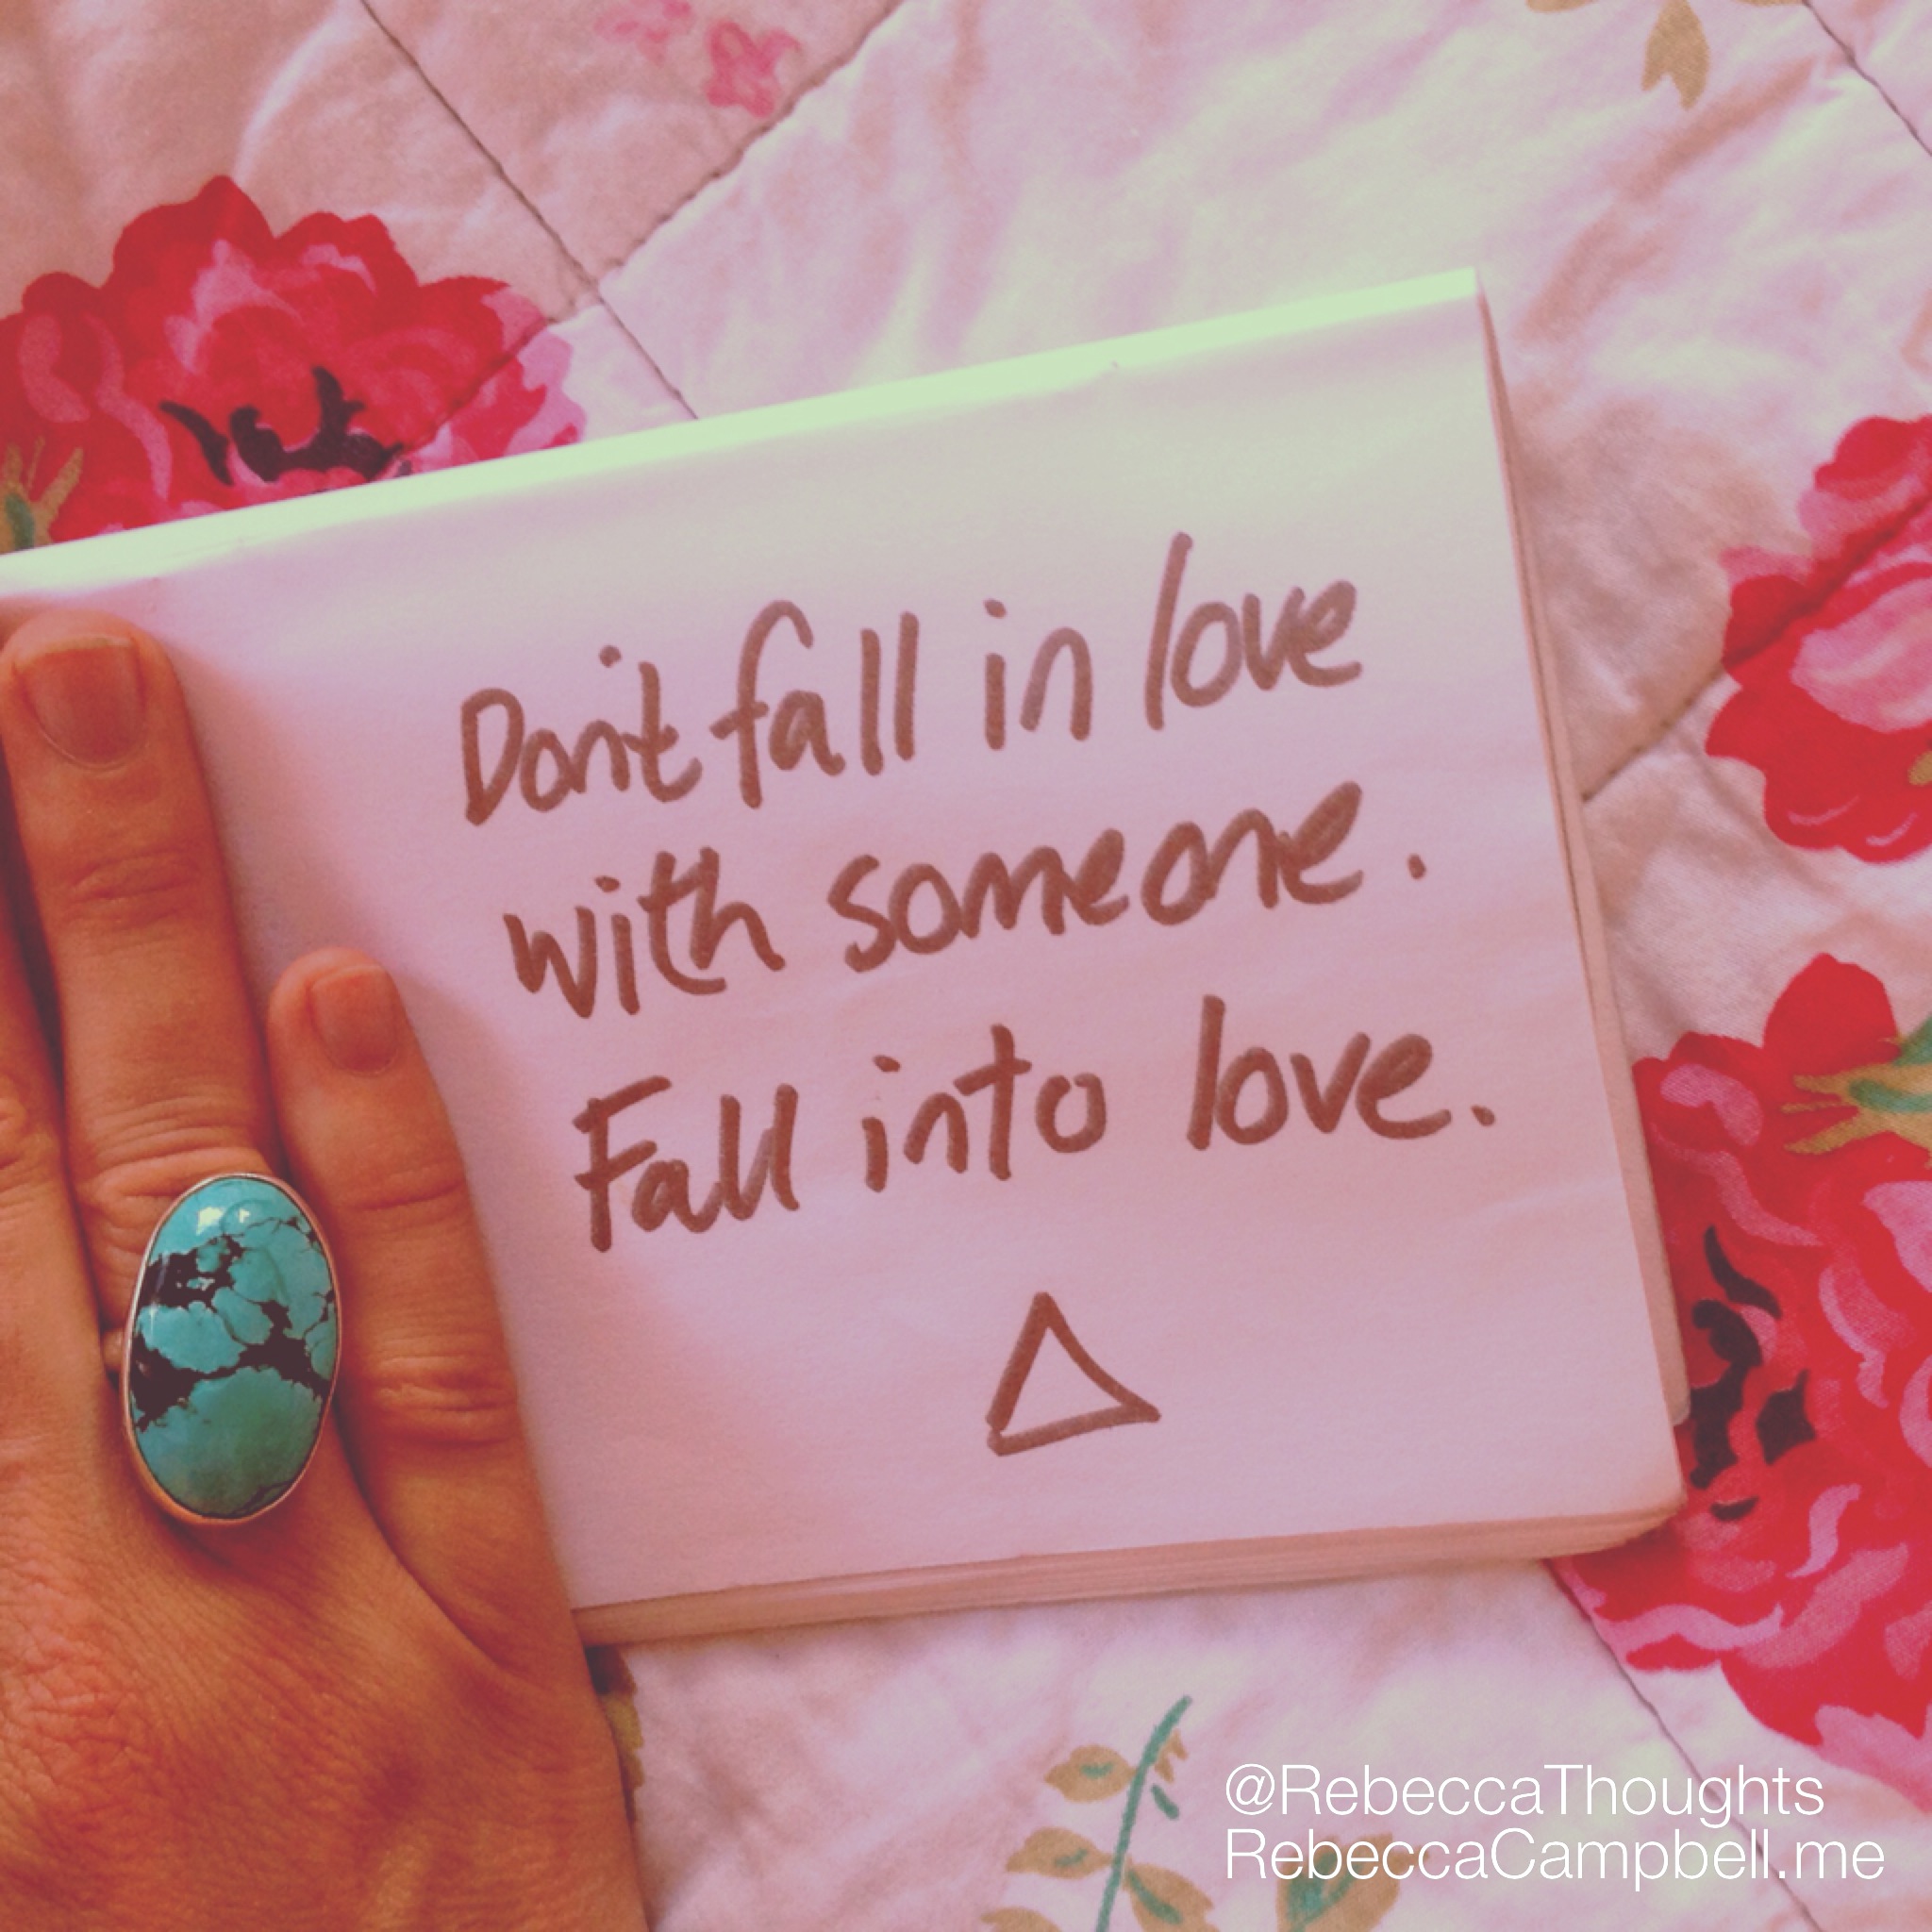 What do you do when you fall in love